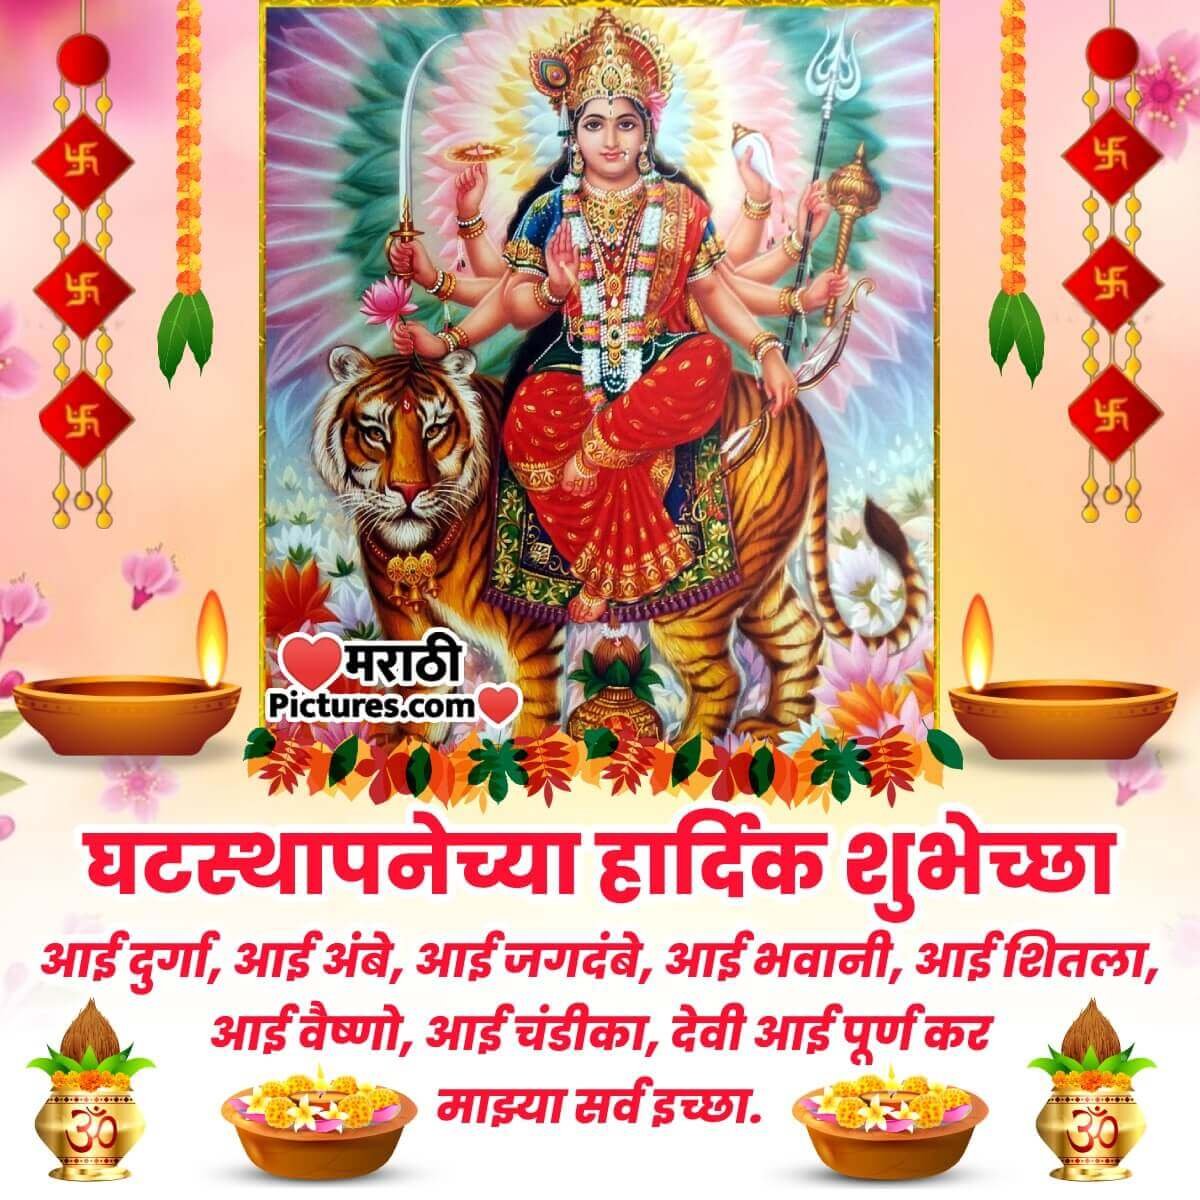 Blessed Navratri Message Image